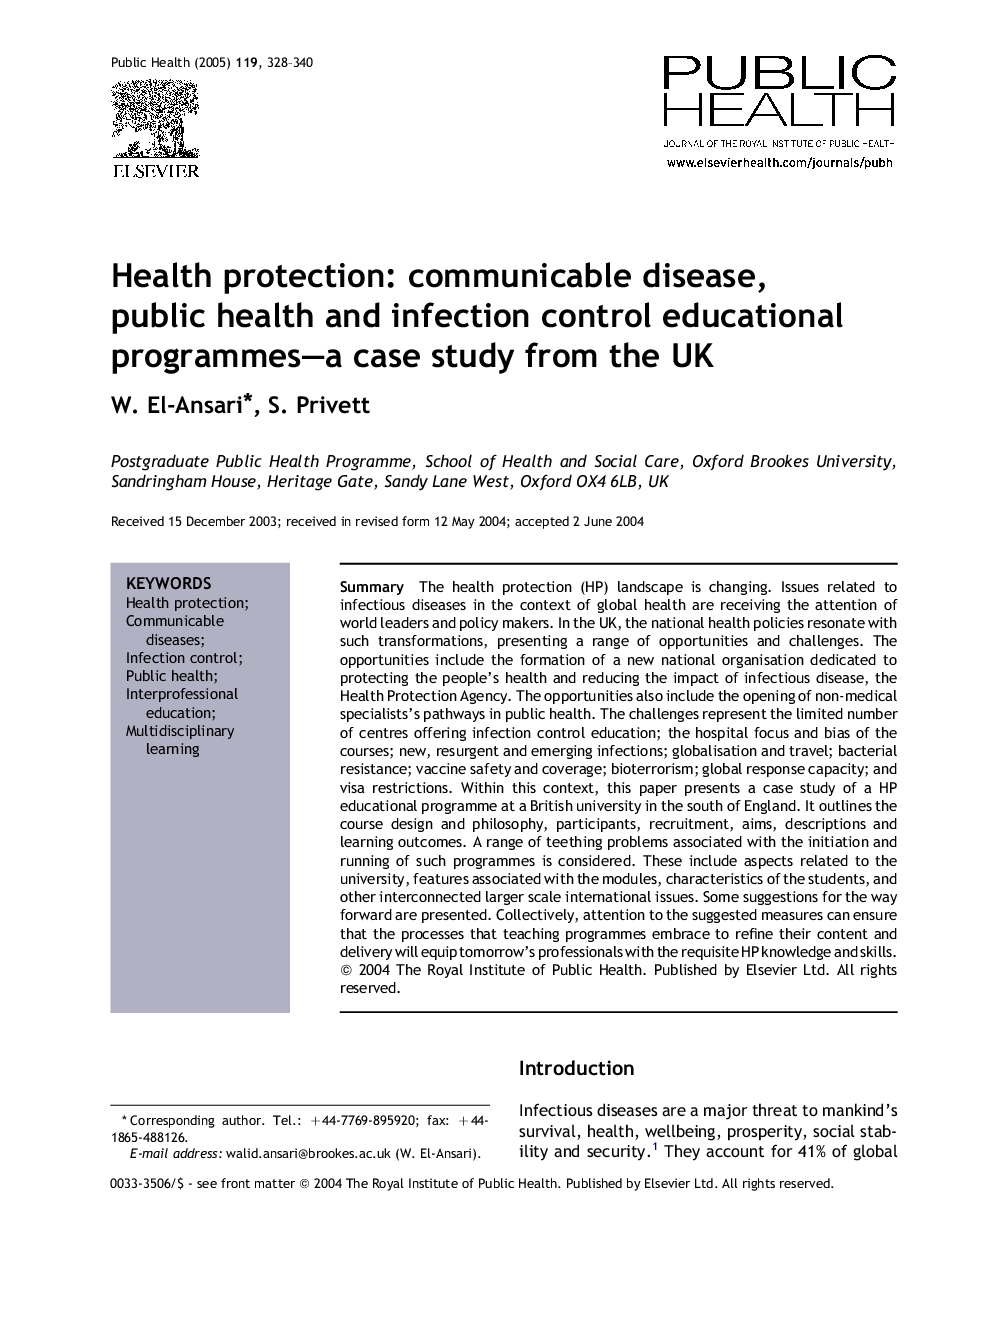 Health protection: communicable disease, public health and infection control educational programmes-a case study from the UK